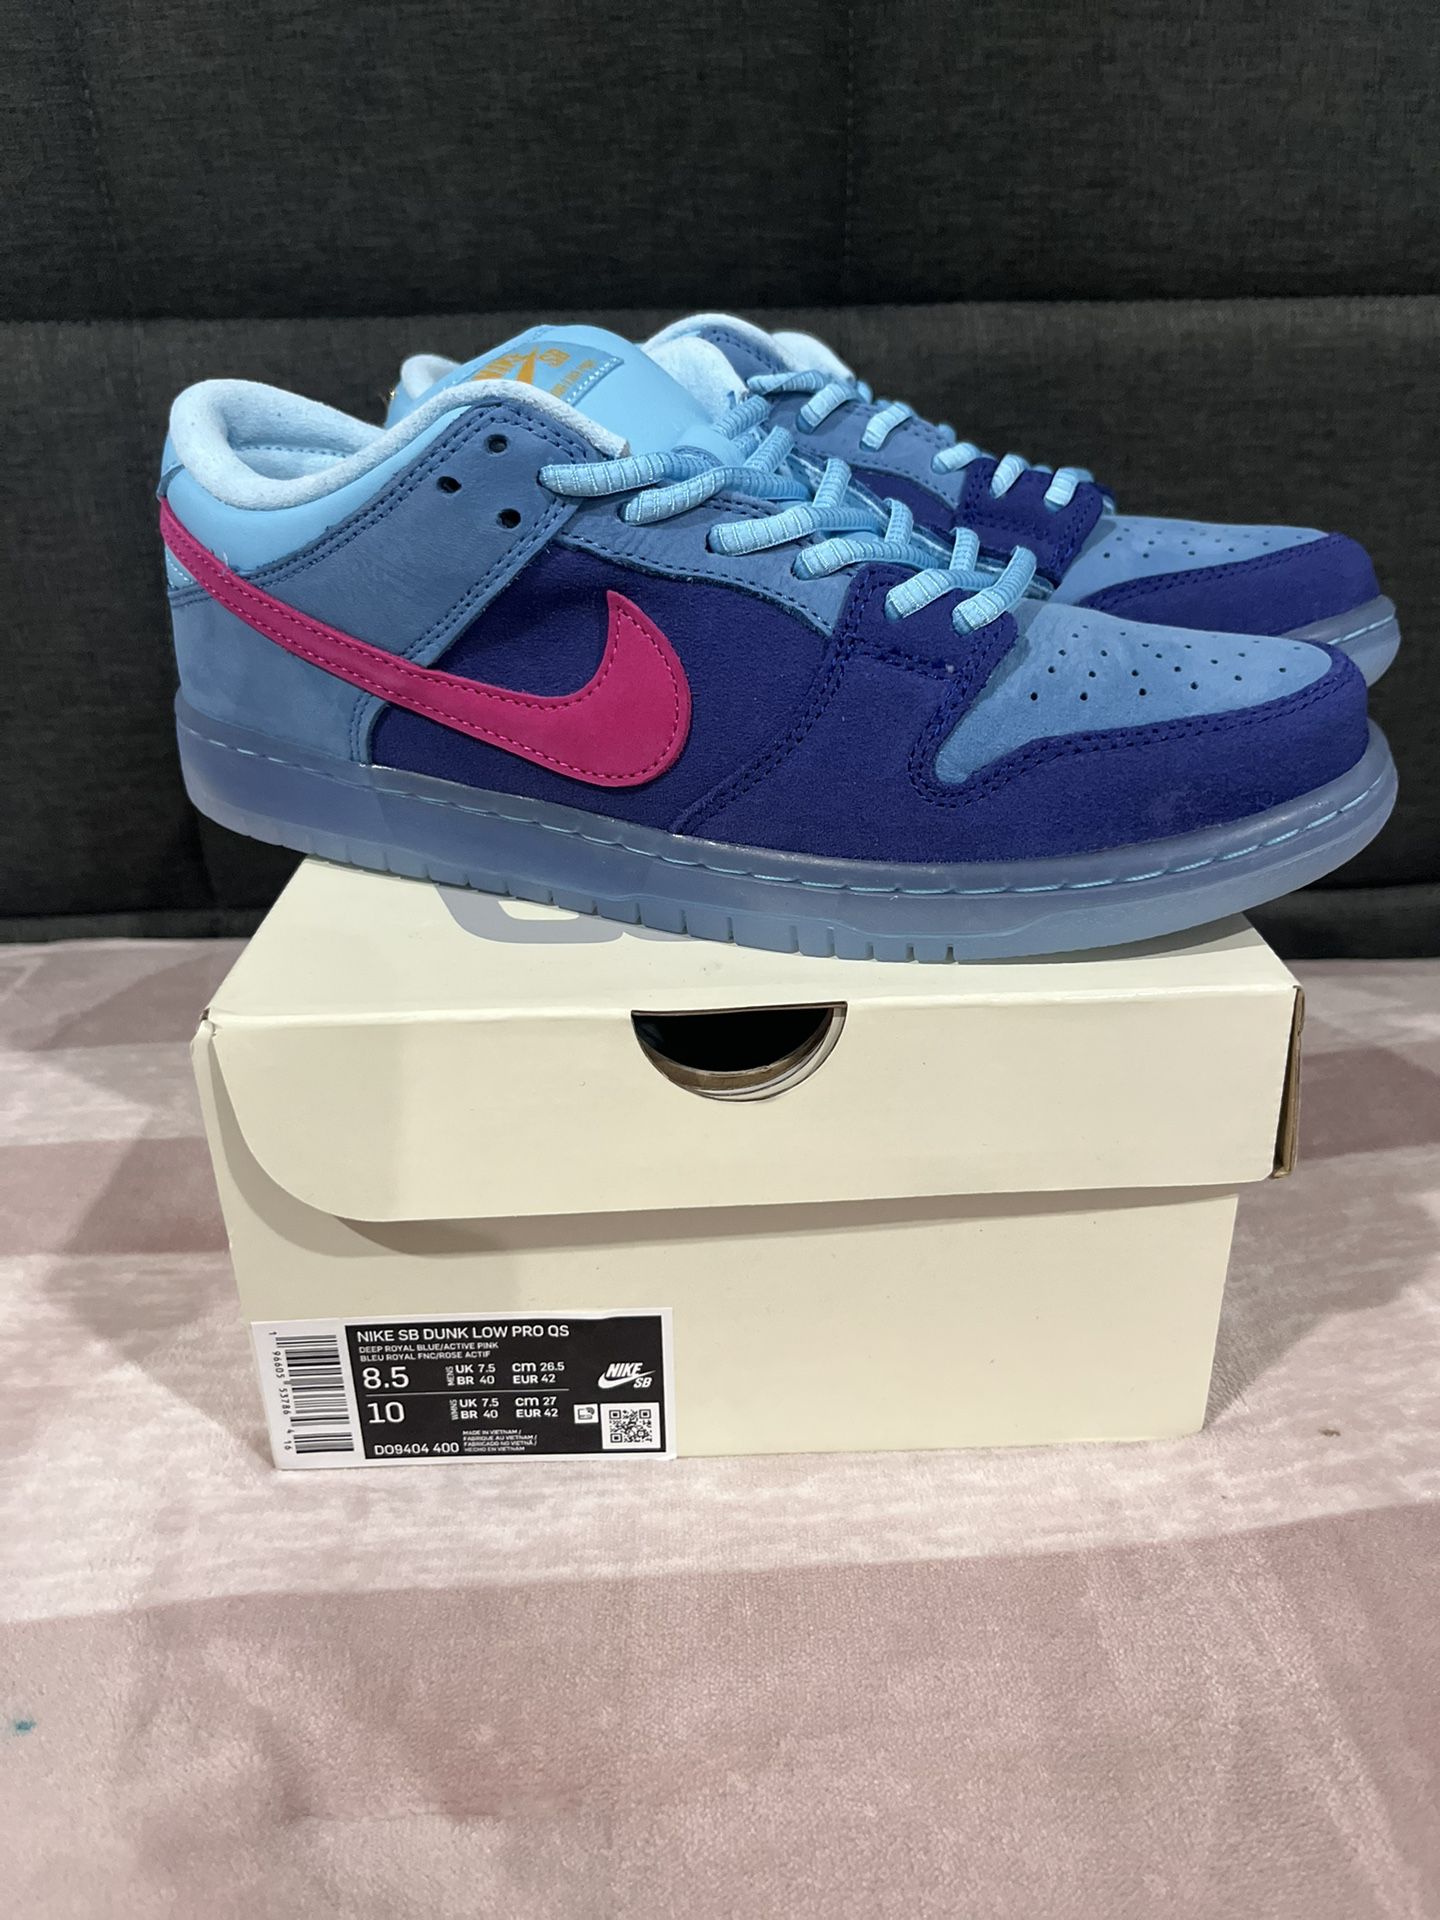 Nike SB Dunk Low Jewels Sz8.5 for Sale in Los Angeles, CA - OfferUp